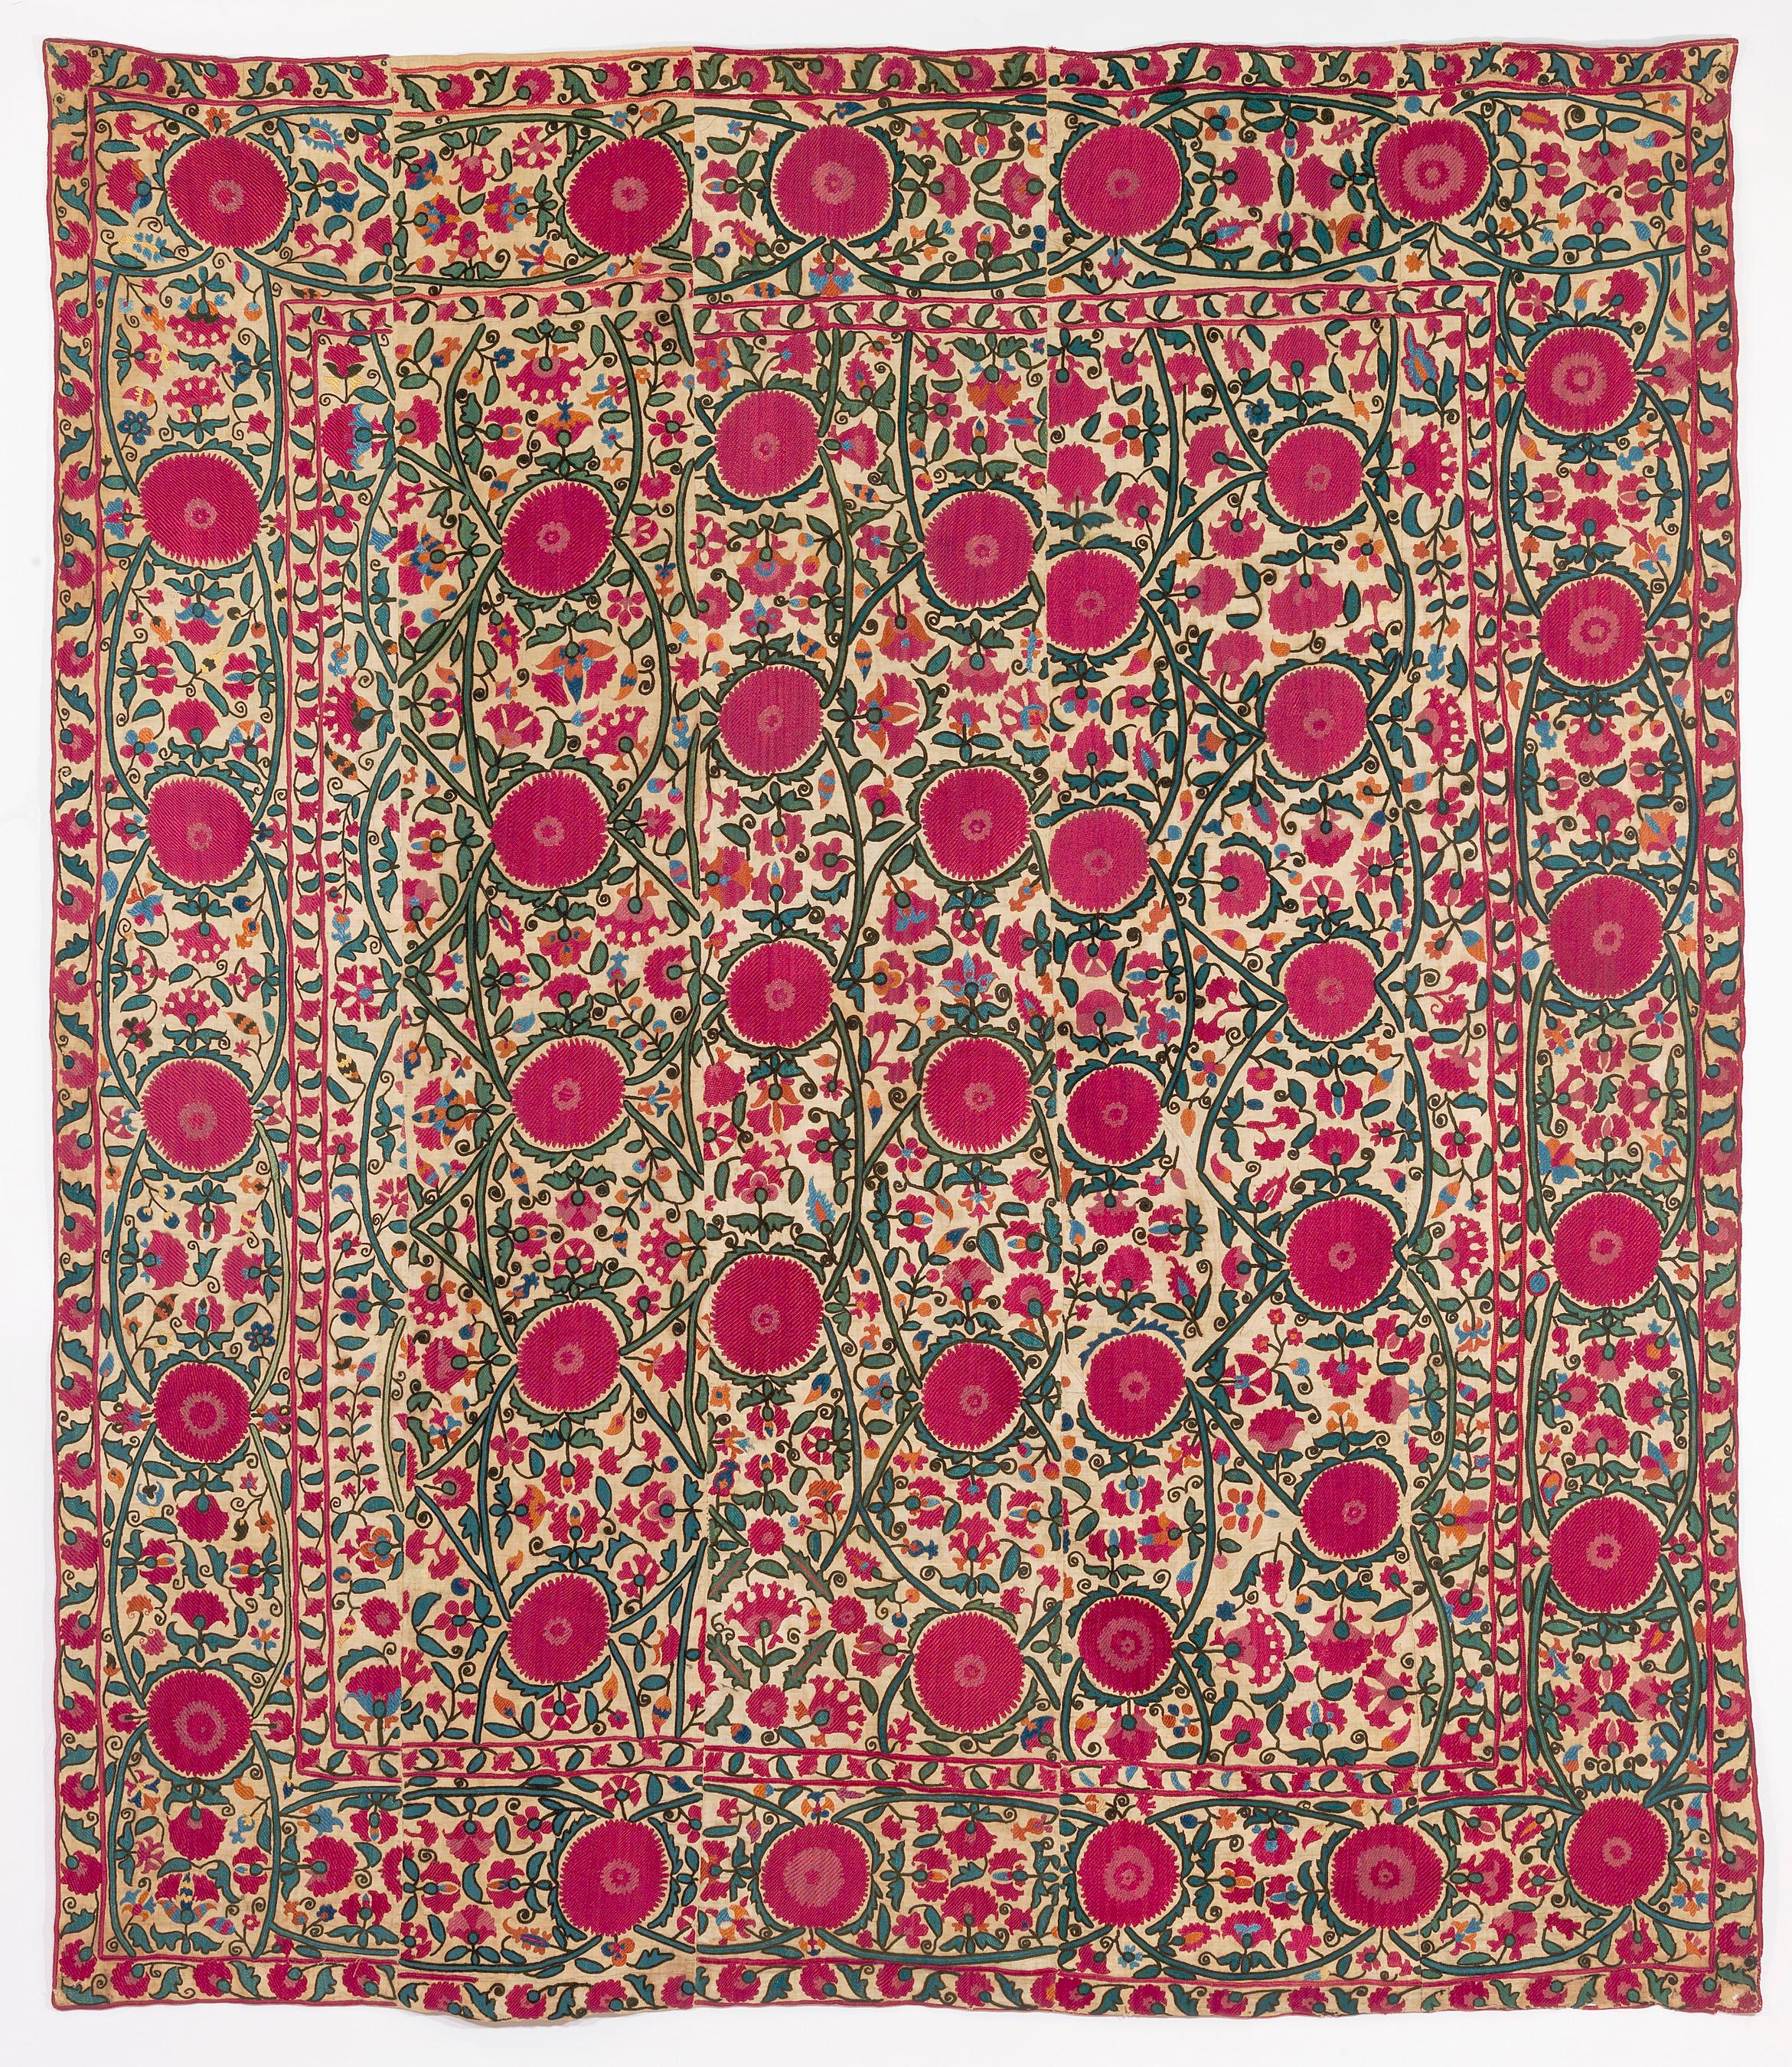 Susani, Uzbekistan, first half 19th. cent., Samarkand, wonderful silk embroidery in Basma and Tambour stitch. Dowry pieces like this were made on narrow stripes of hand-woven cotton which were embroidered separately and later joined, especially